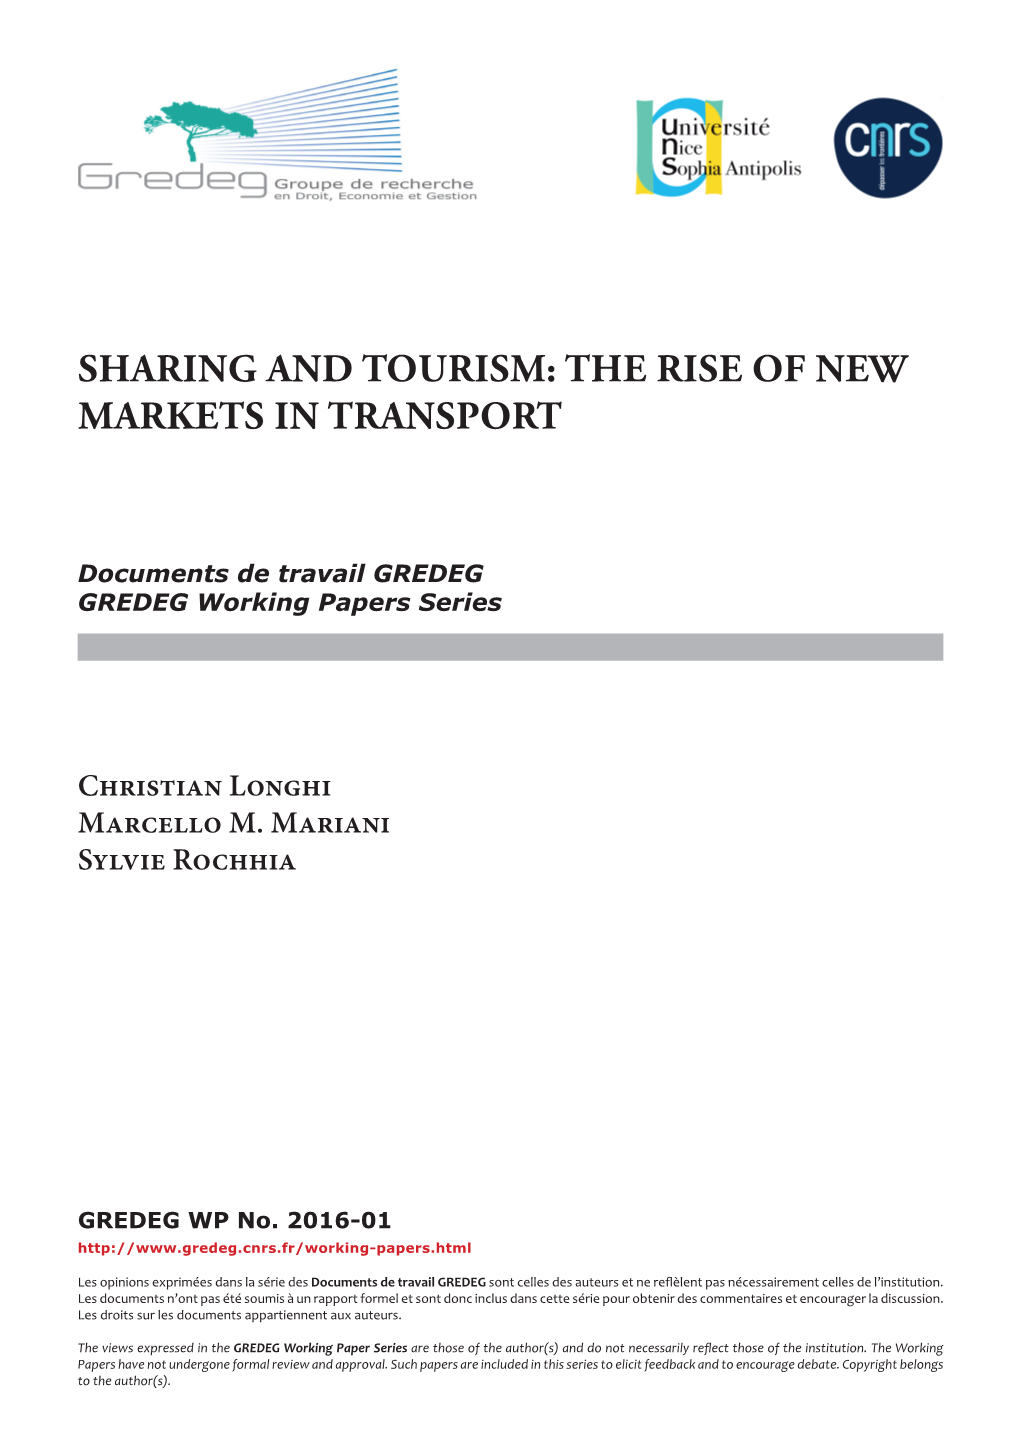 Sharing and Tourism: the Rise of New Markets in Transport